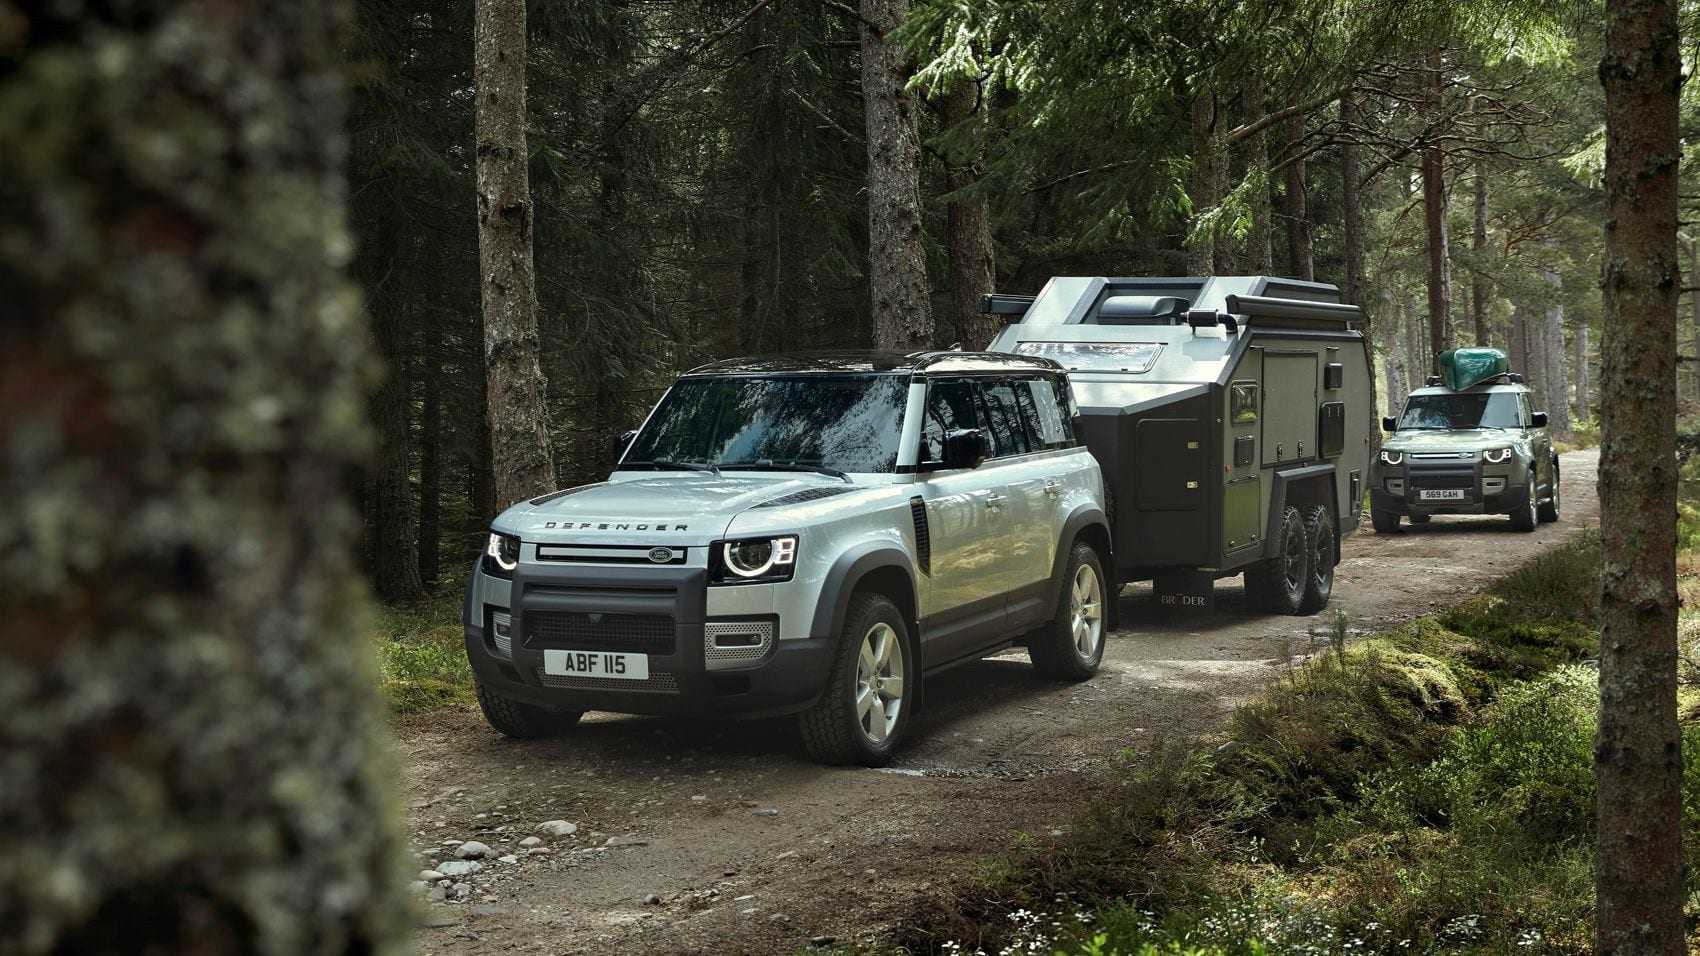 Land Rover DEFENDER – The Drive to Go Beyond